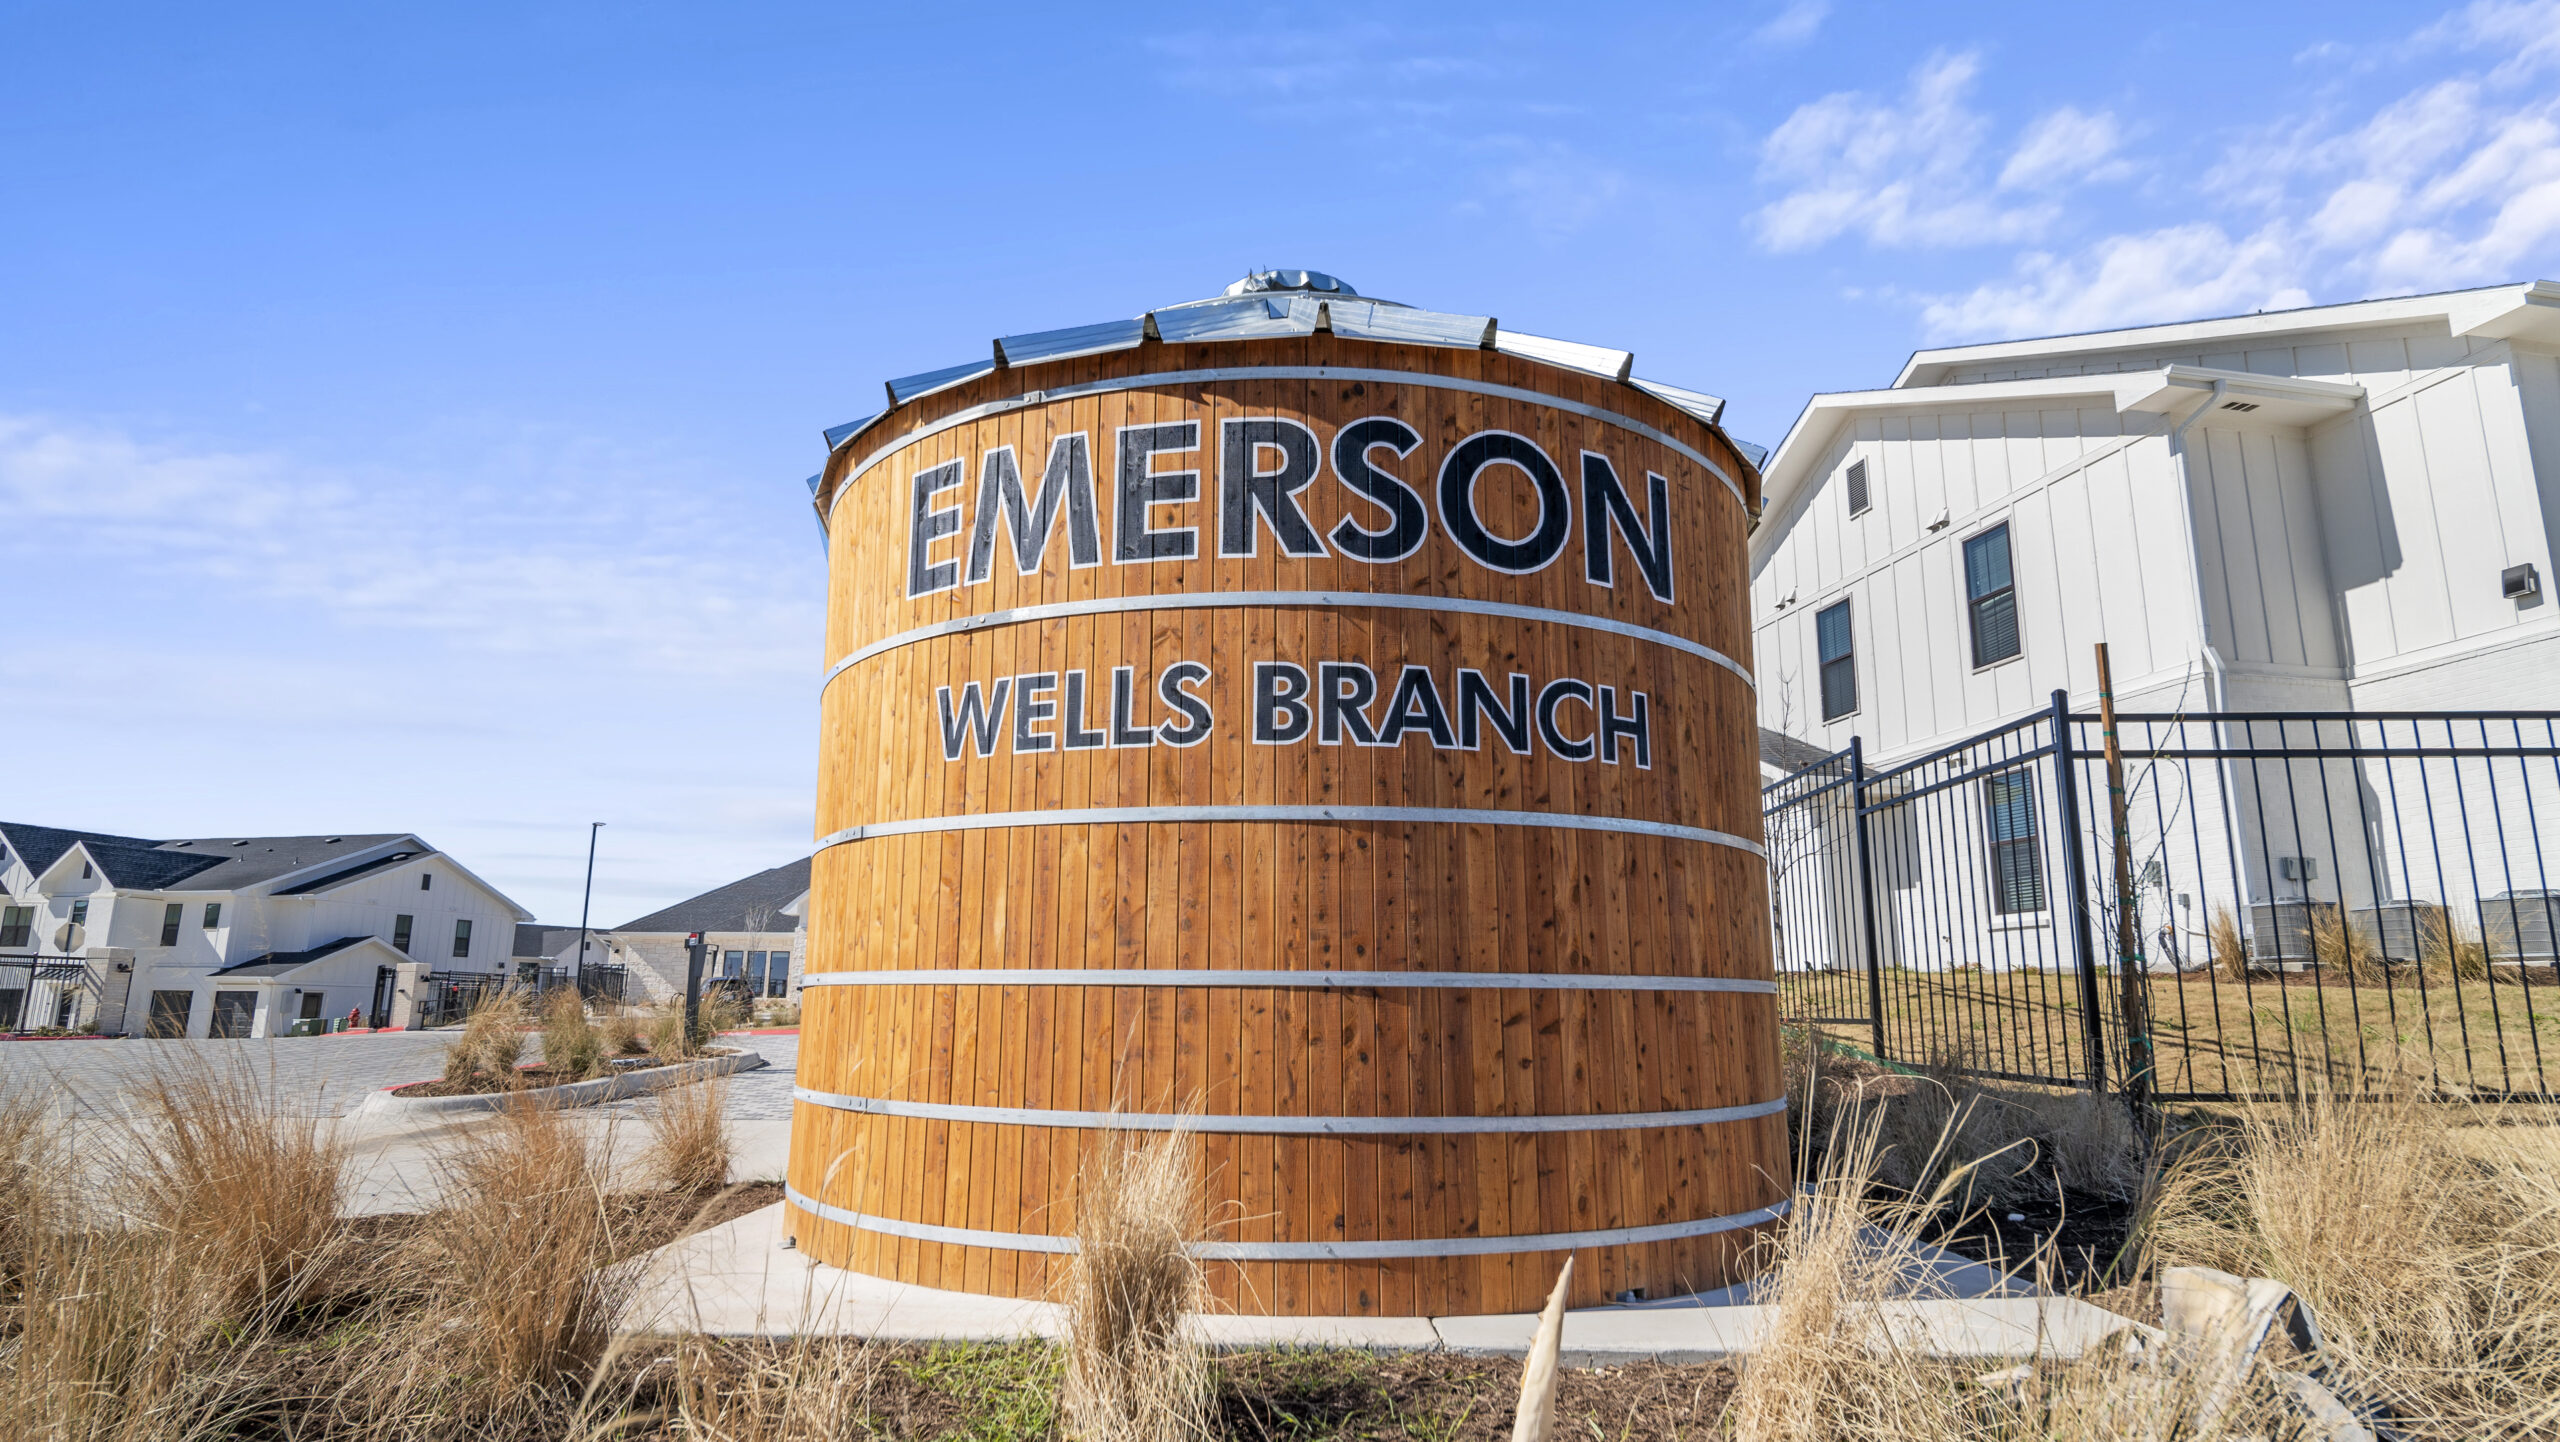 Emerson at Wells Branch